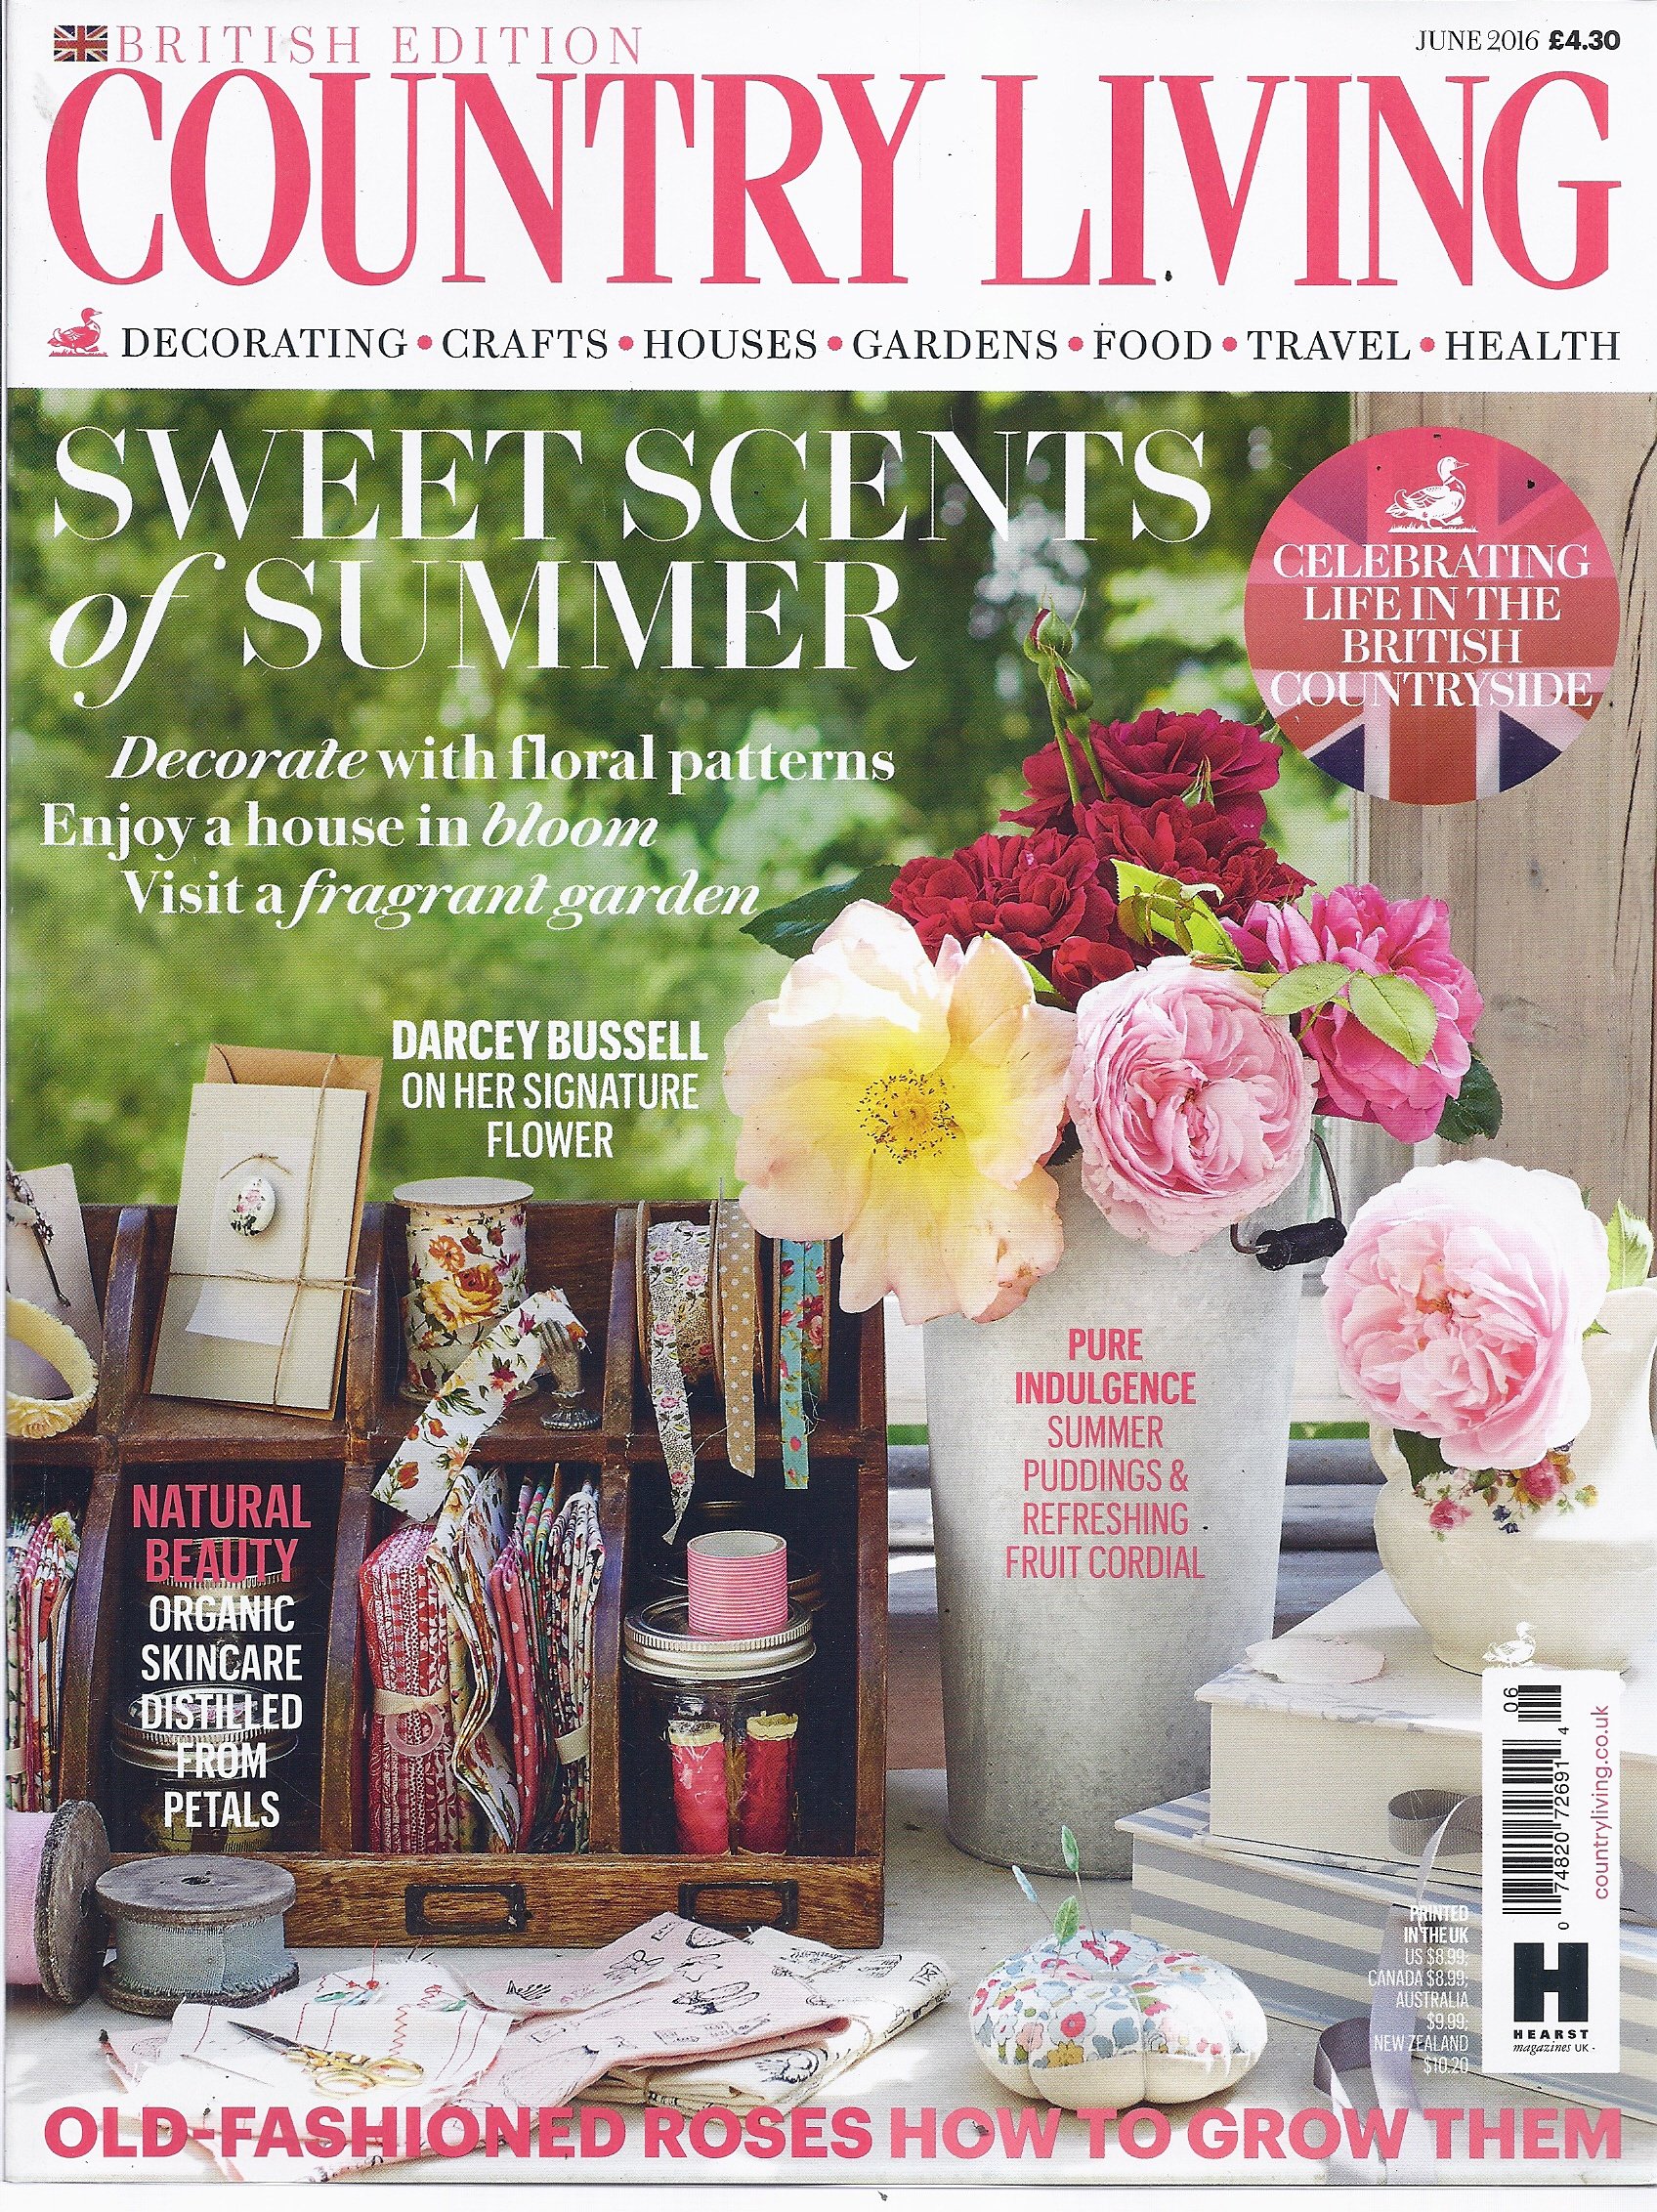 Country Living: June 2016